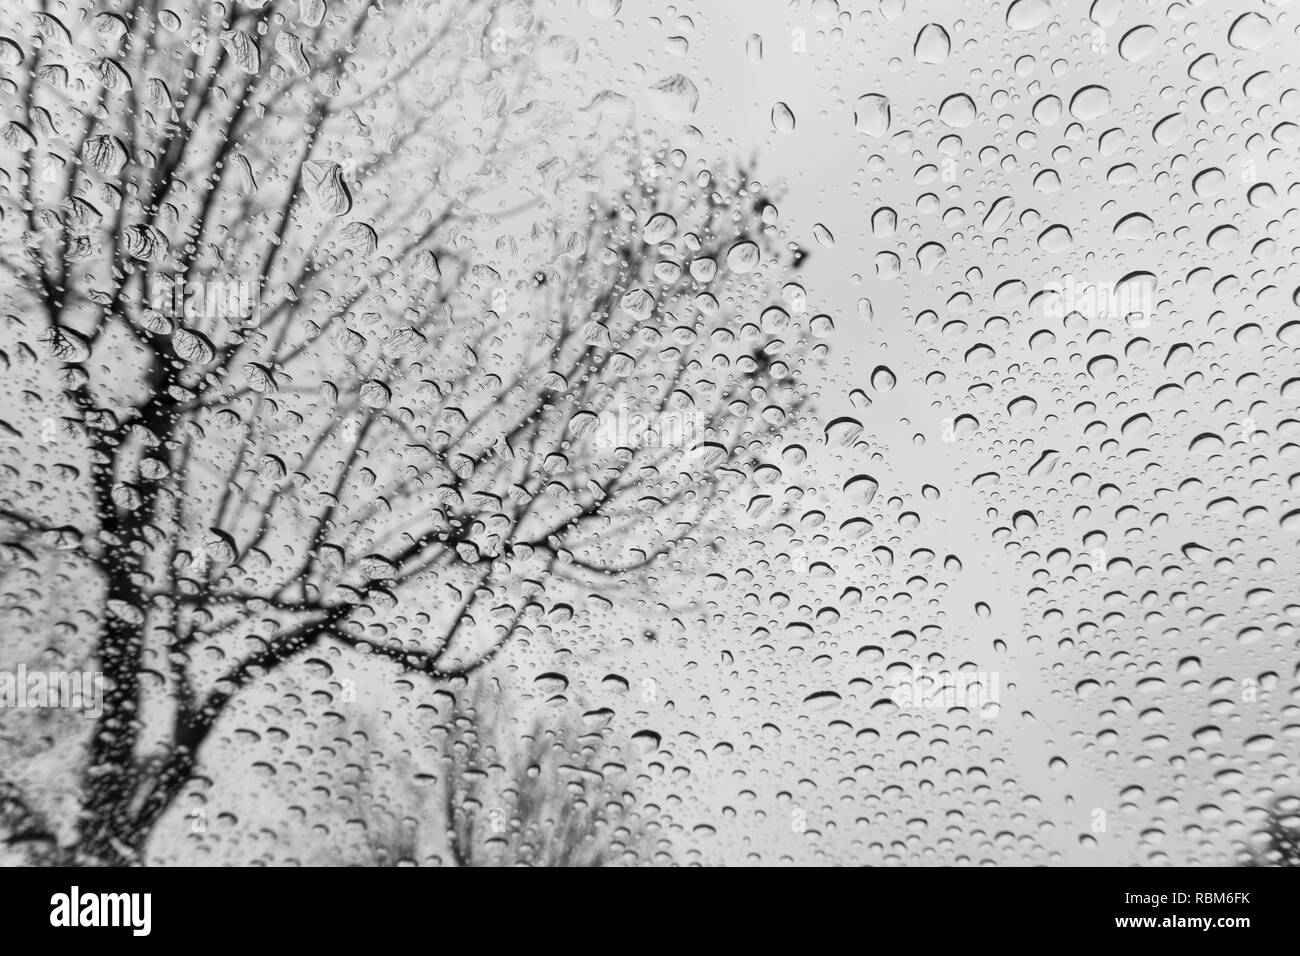 Drops of rain on the windshield, blurred tree shape on the background, black&white Stock Photo